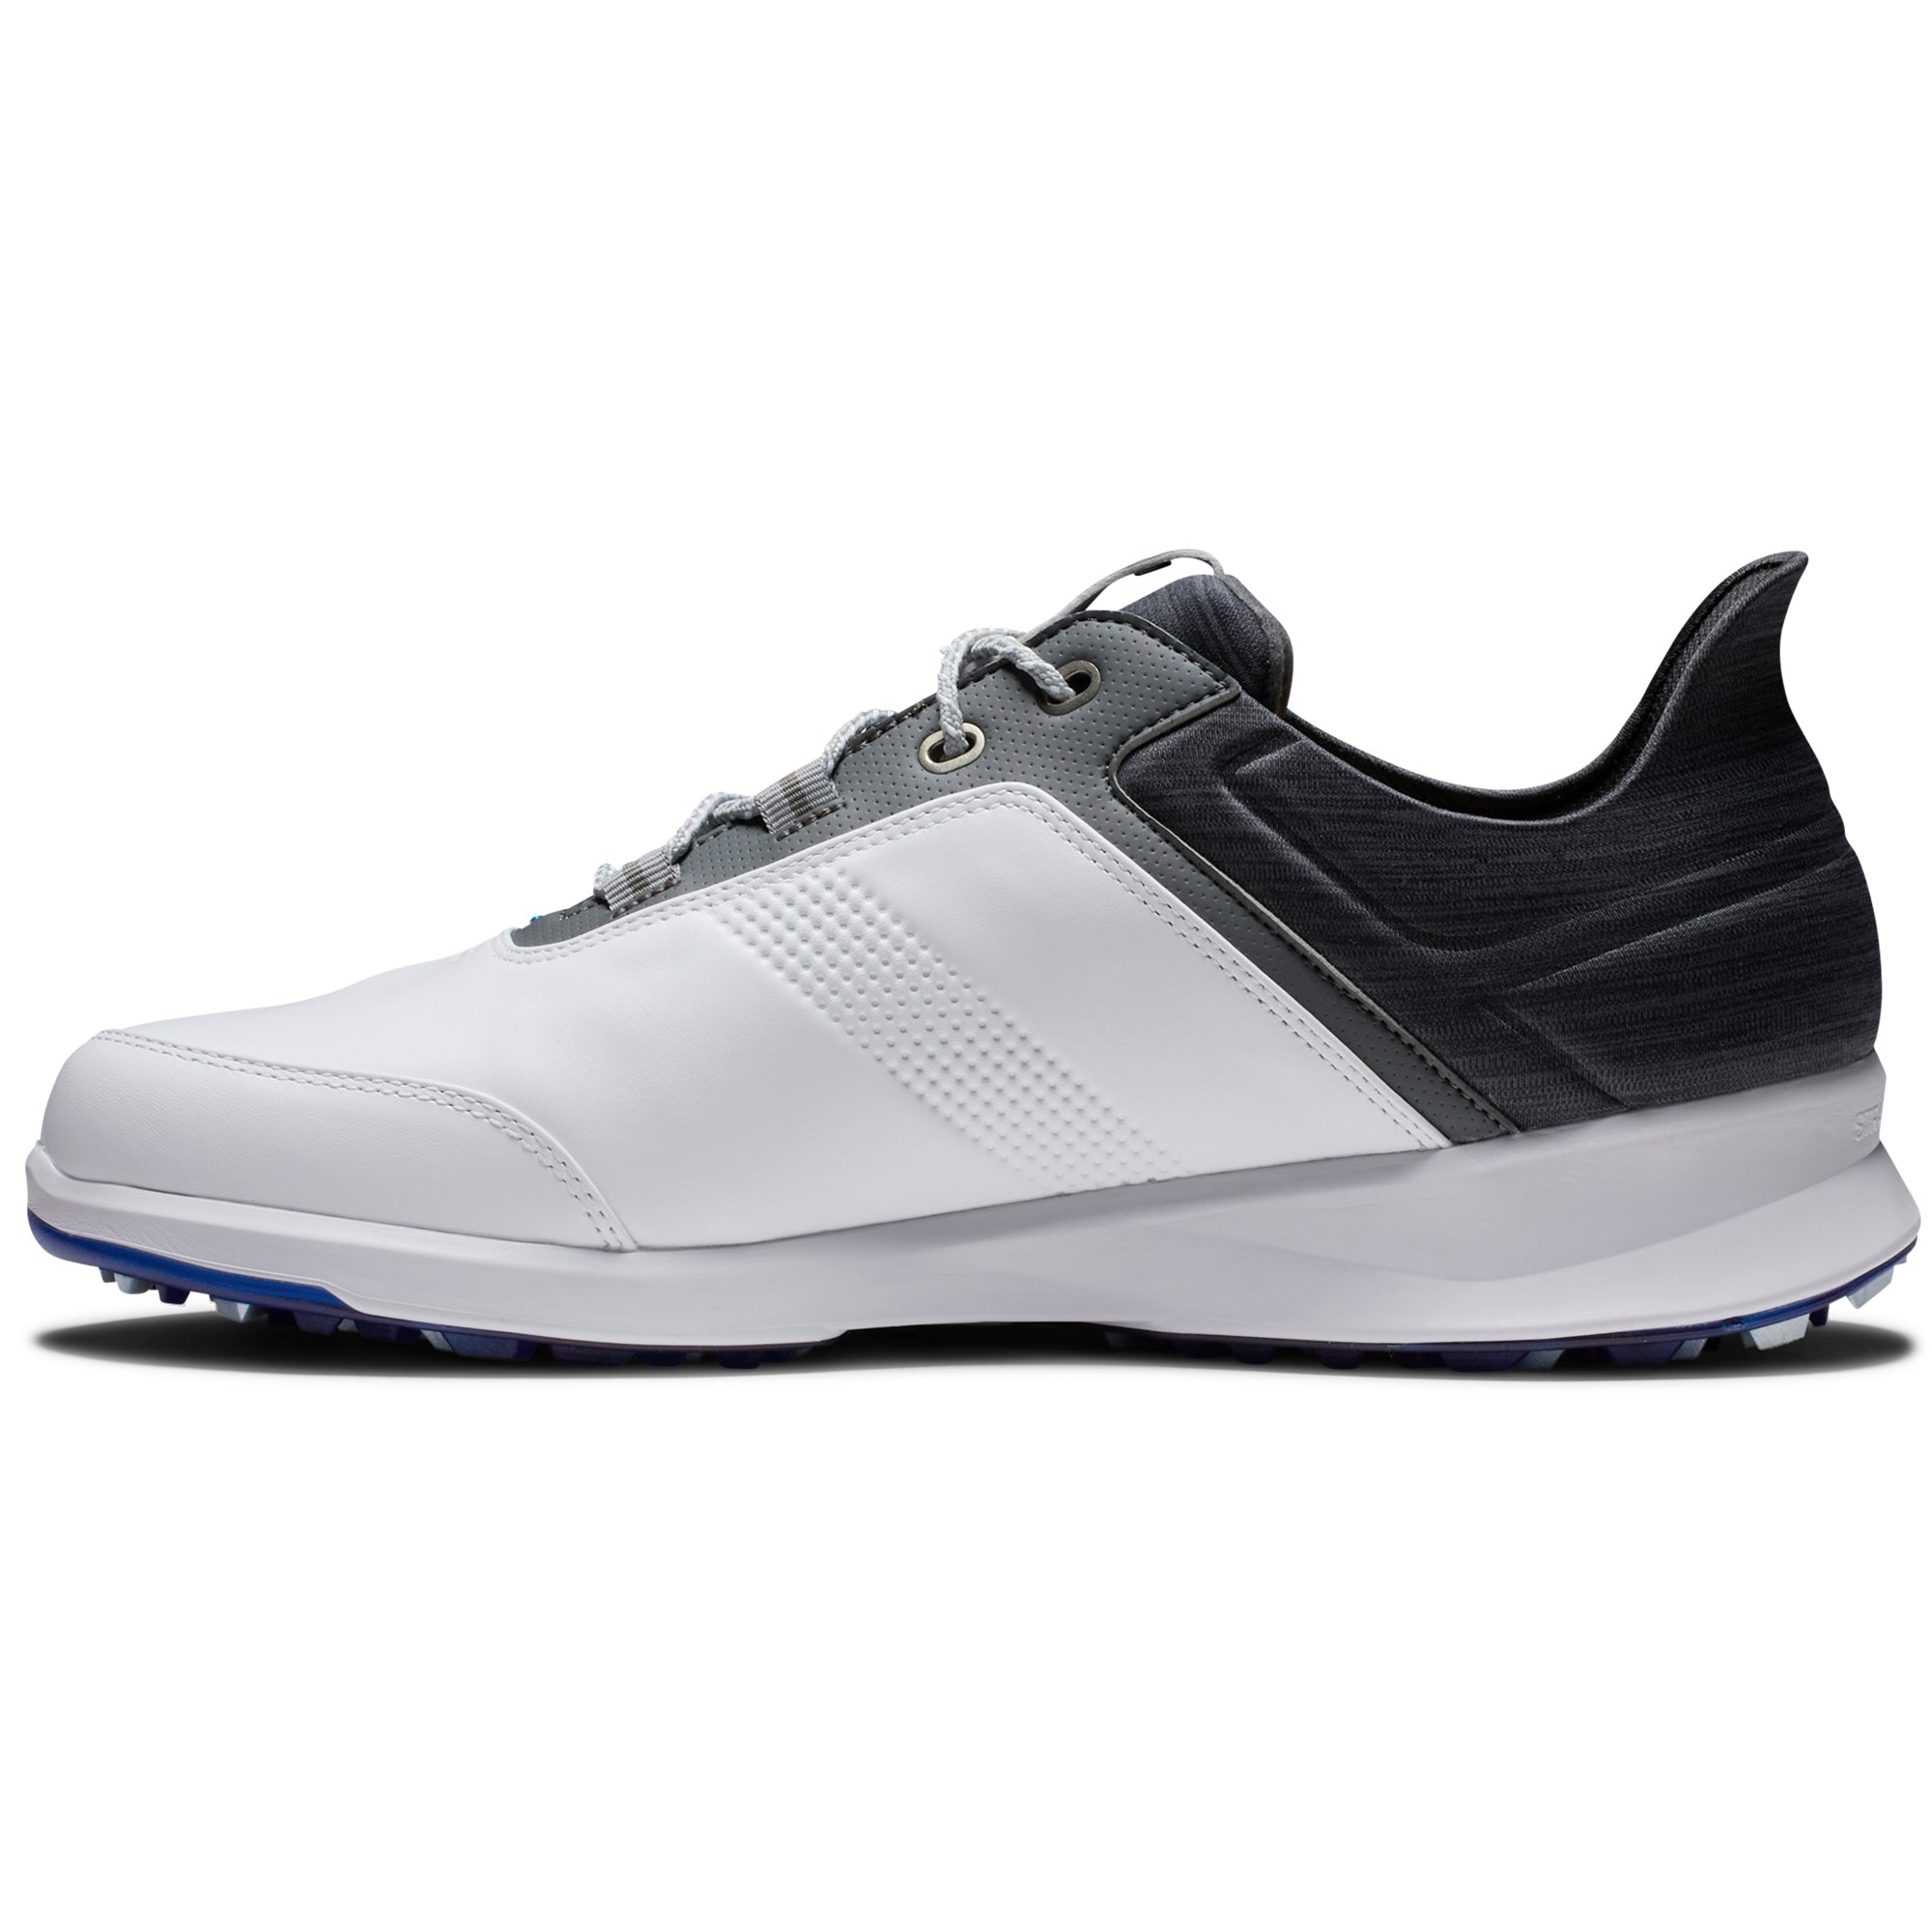 footjoy-stratos-golf-shoes-50072-white-charcoal-blue-jay